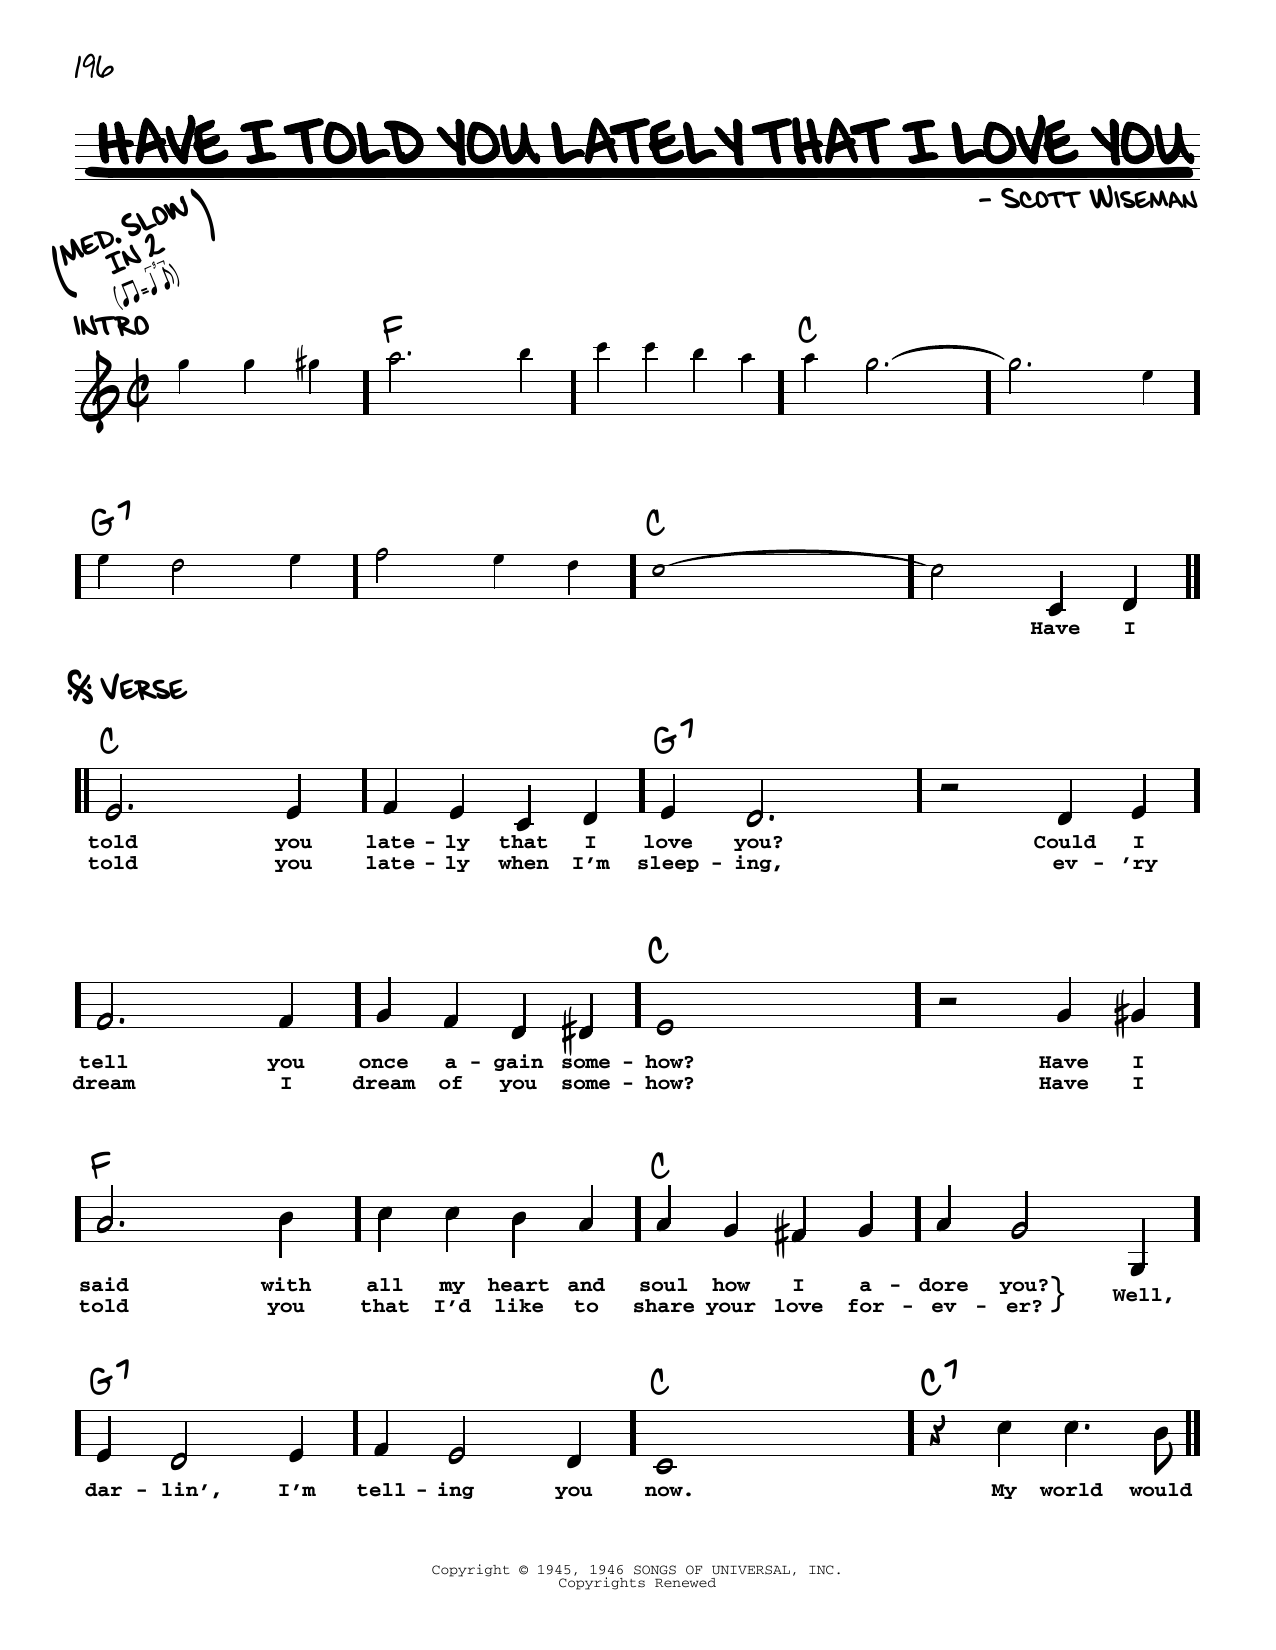 Download Scott Wiseman Have I Told You Lately That I Love You Sheet Music